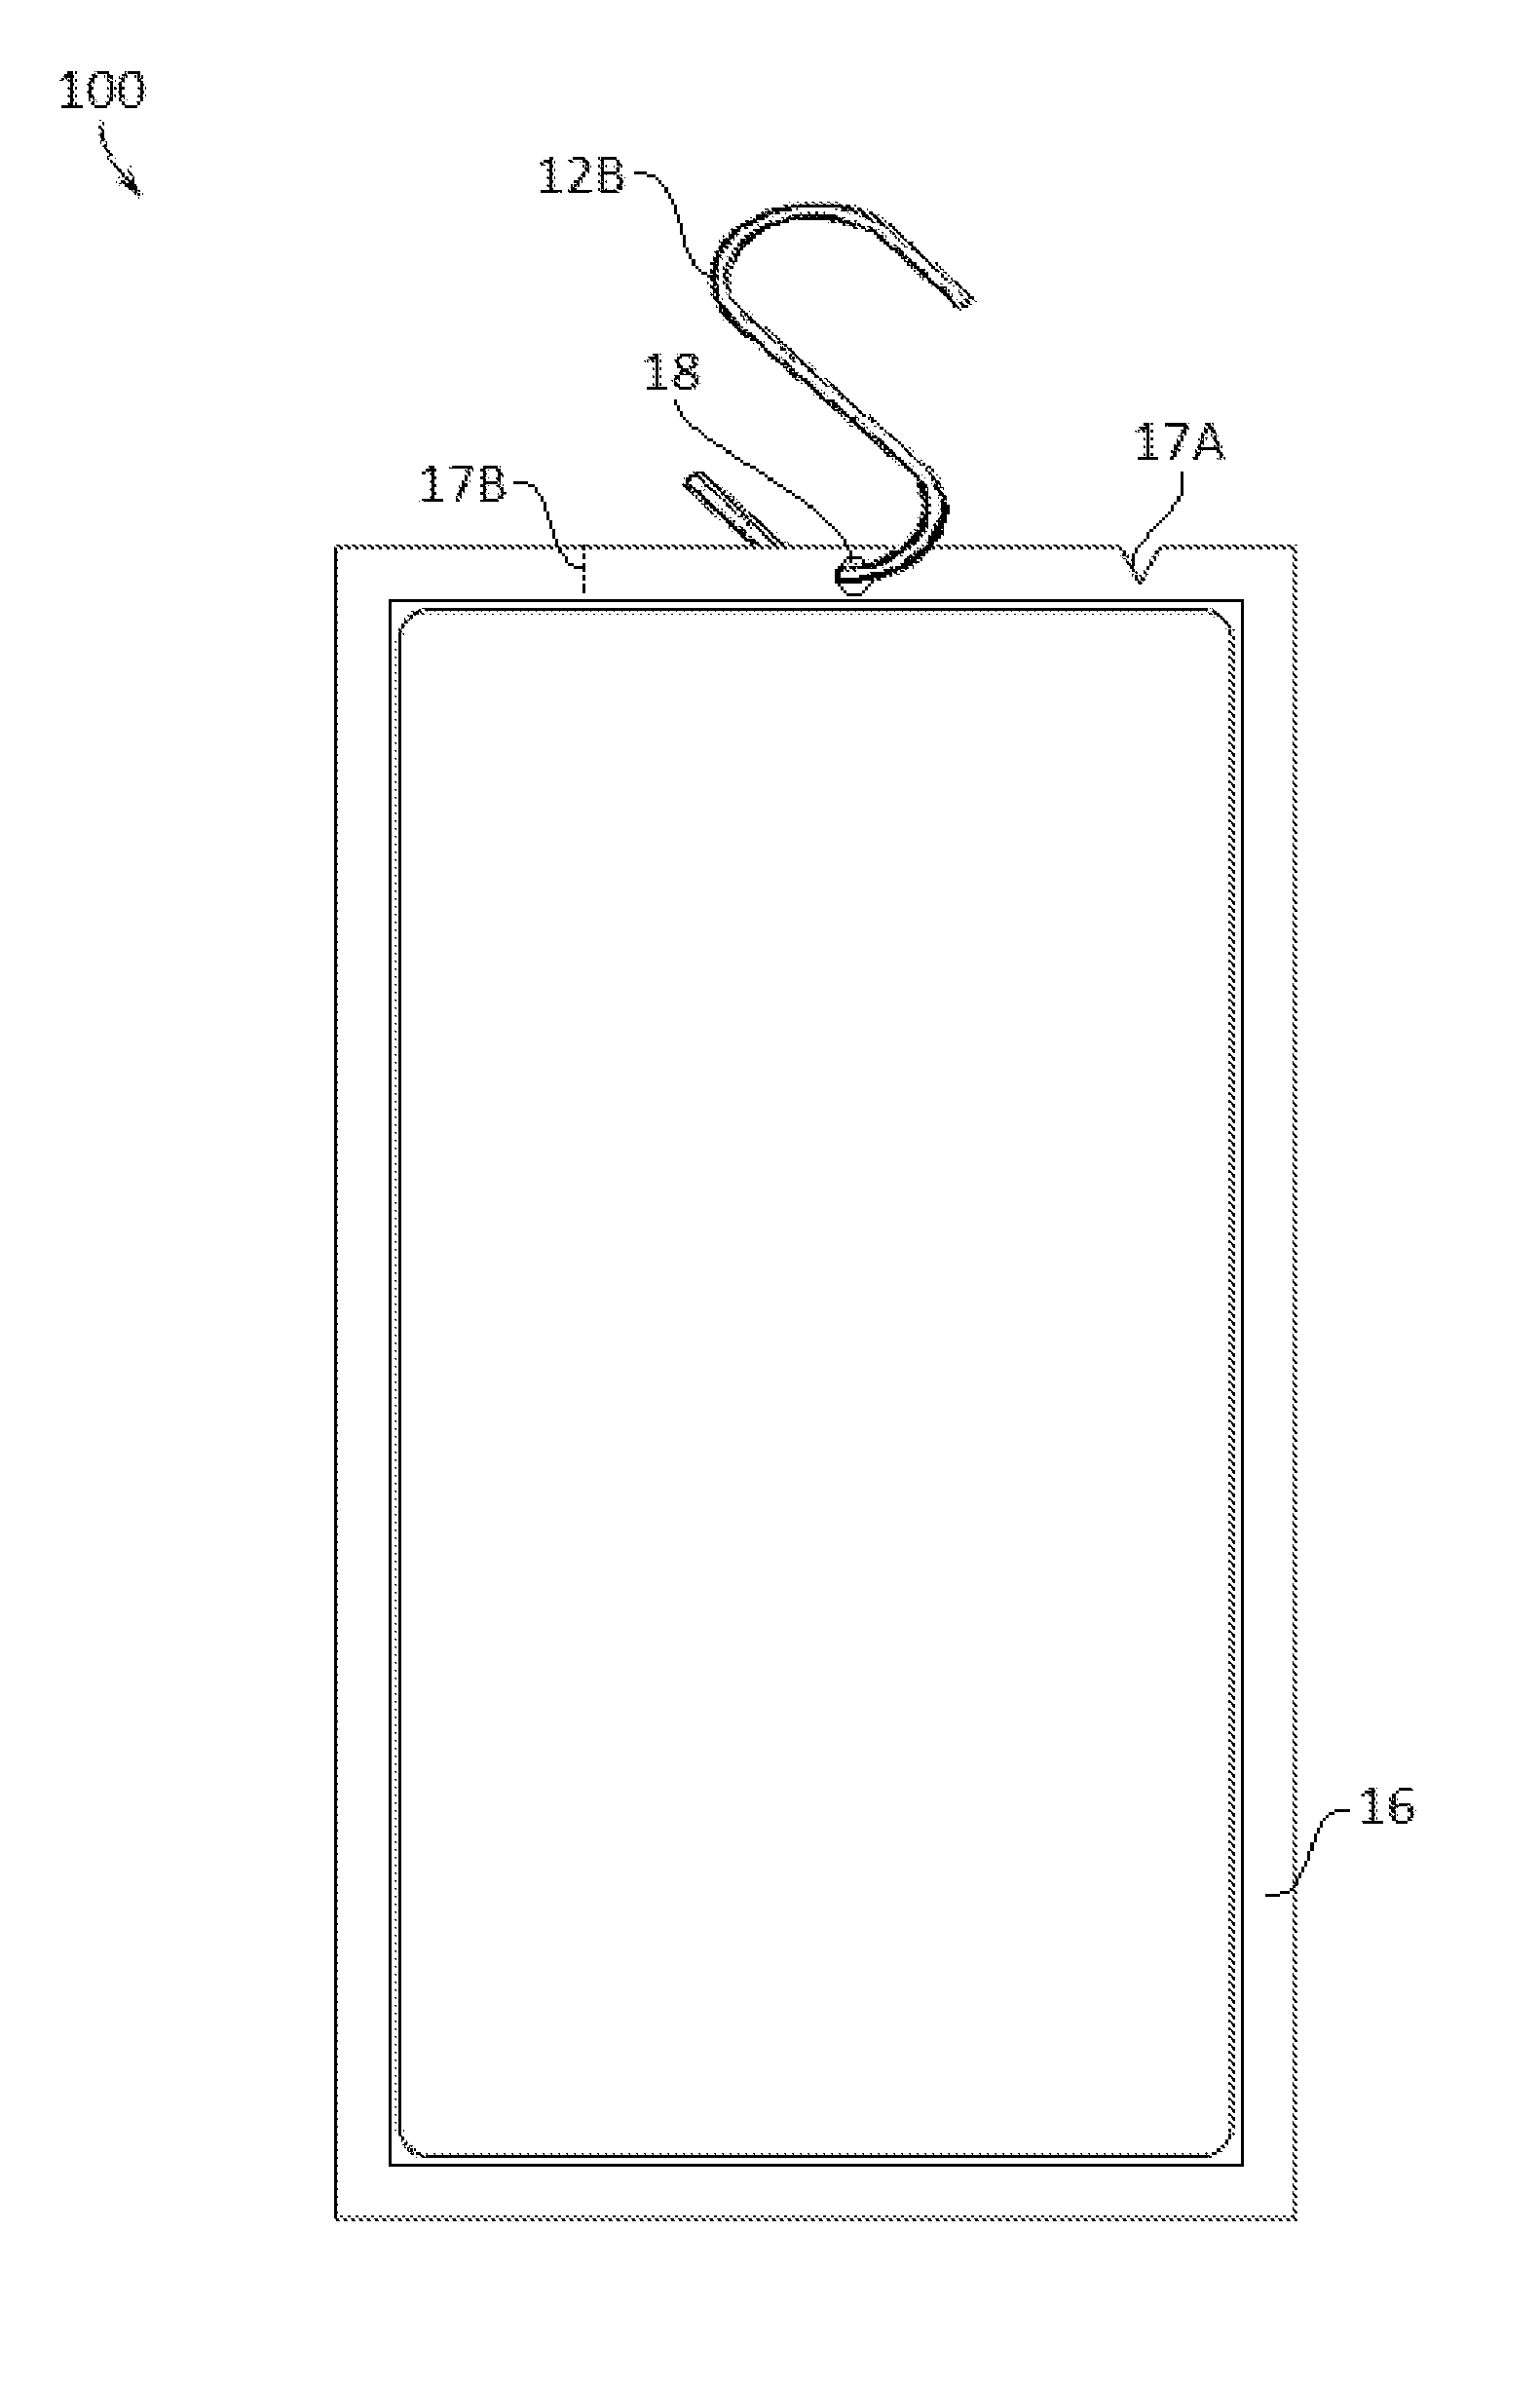 Vacuum sealed clothing and diaper change kit and methods of manufacturing the same